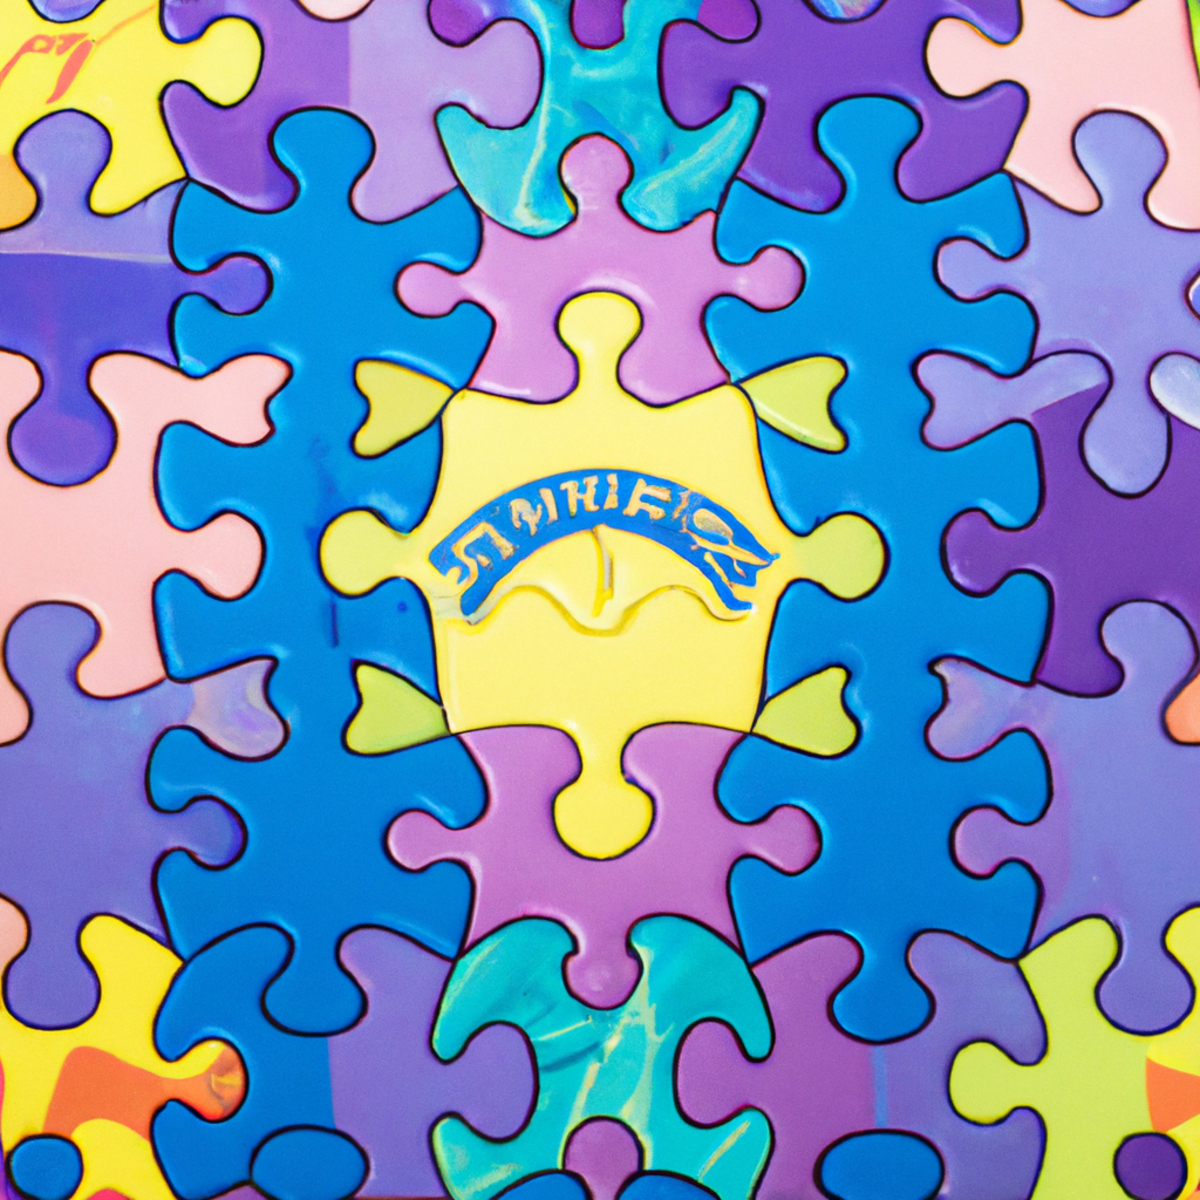 Vibrant puzzle representing Stiff Person Syndrome awareness, showcasing intricate details and diverse colors, patterns, and textures.